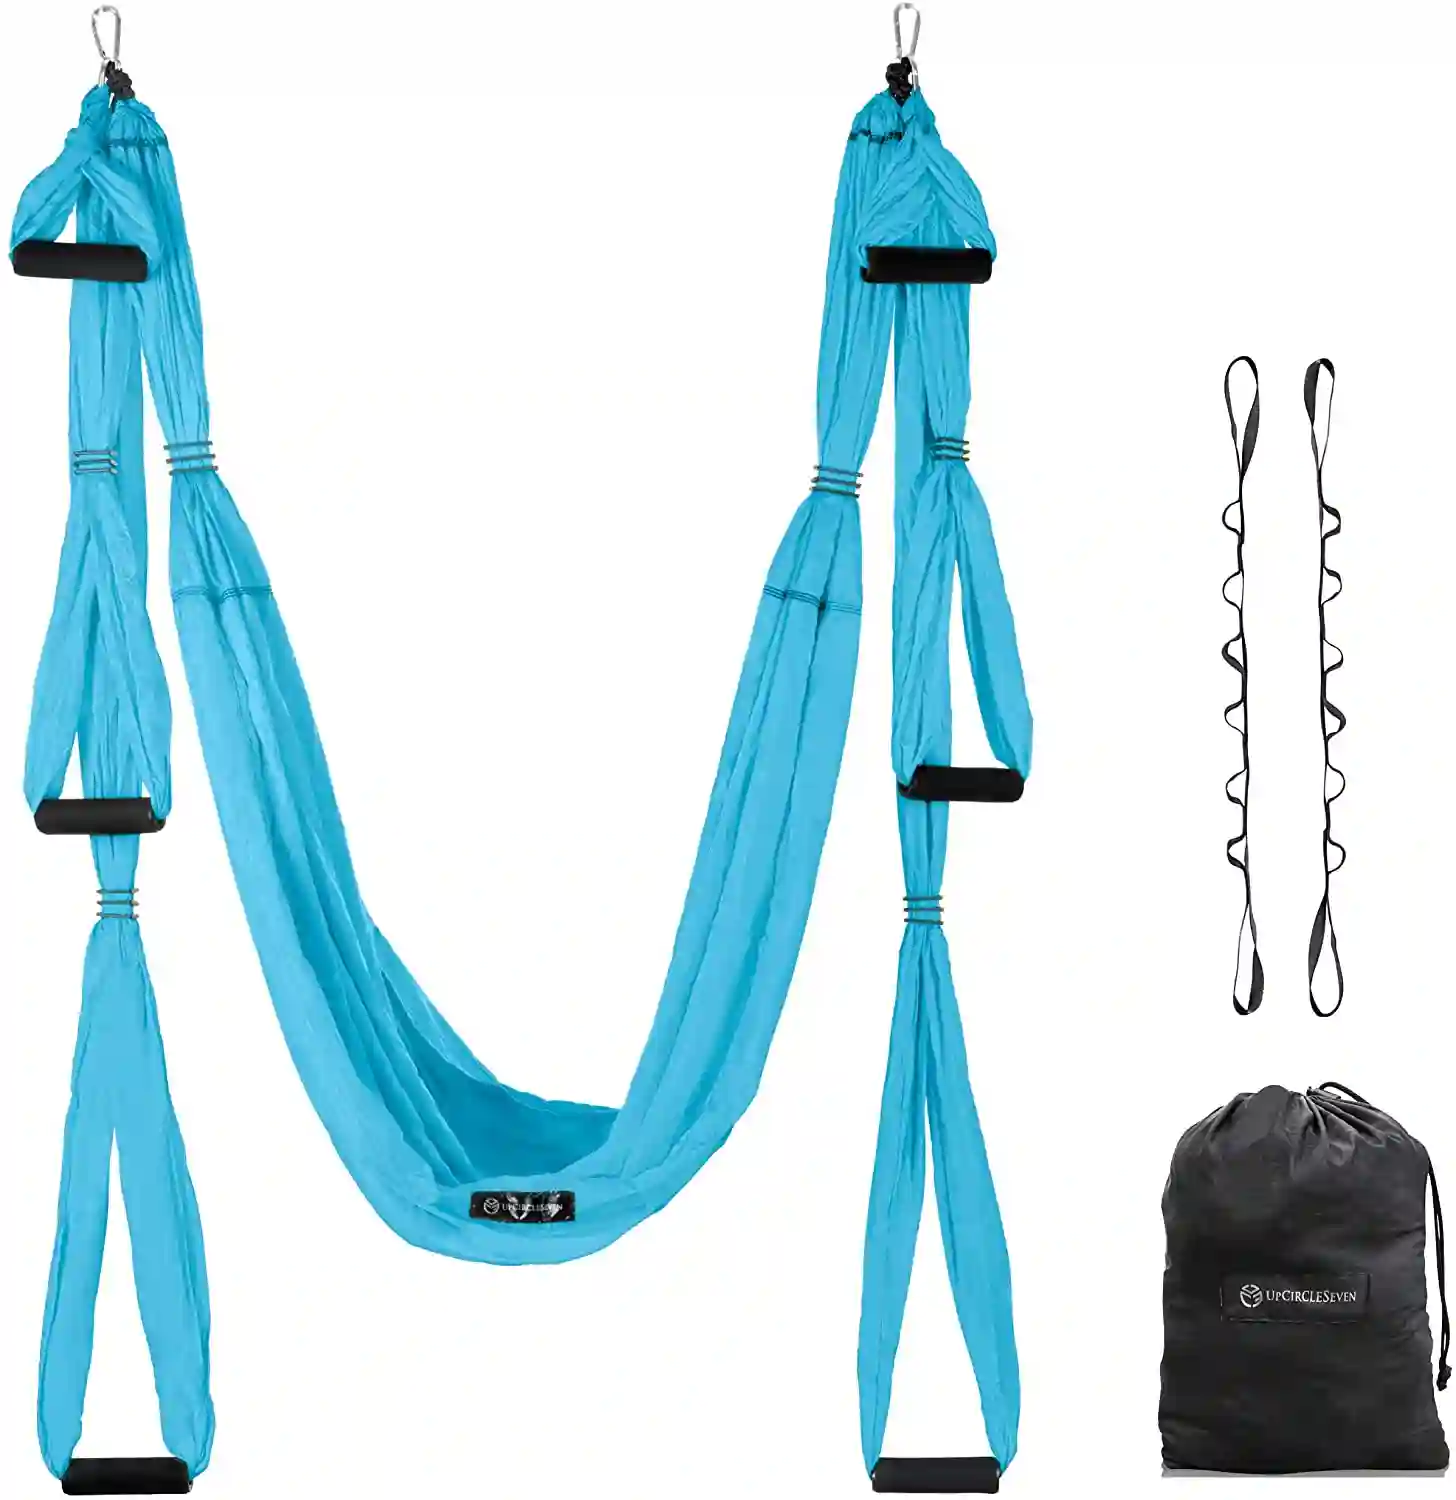 Yoga Trapeze Reviews: Which one is the Best Yoga Trapeze for you?